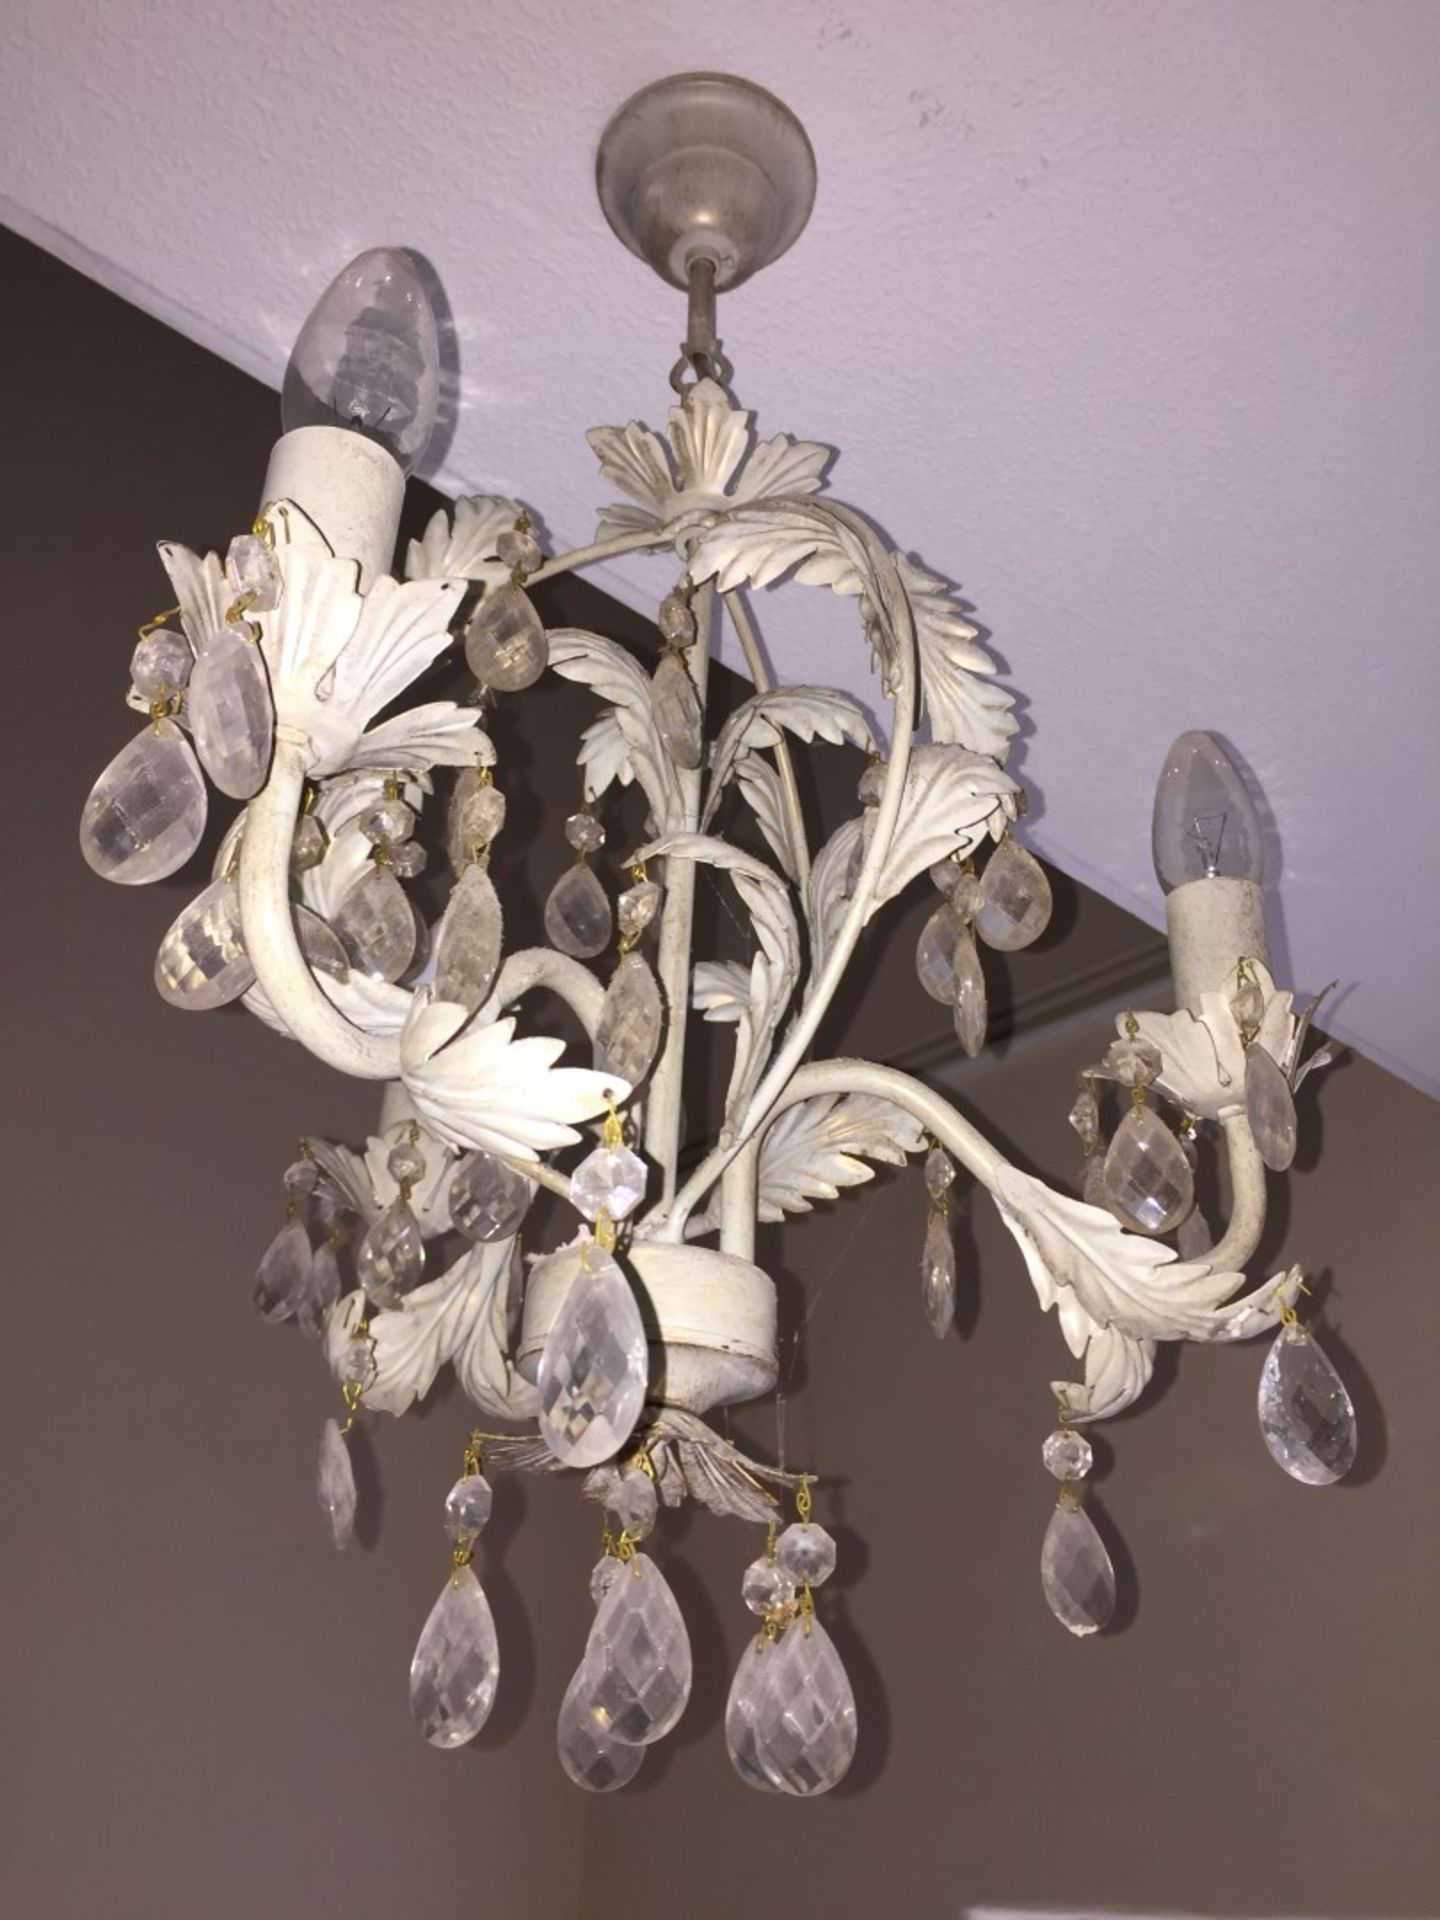 2 x Pendant Chandeliers - Both With Ornate Metal Leaf Design In Cream and Clear Droplet Detail - - Bild 3 aus 4